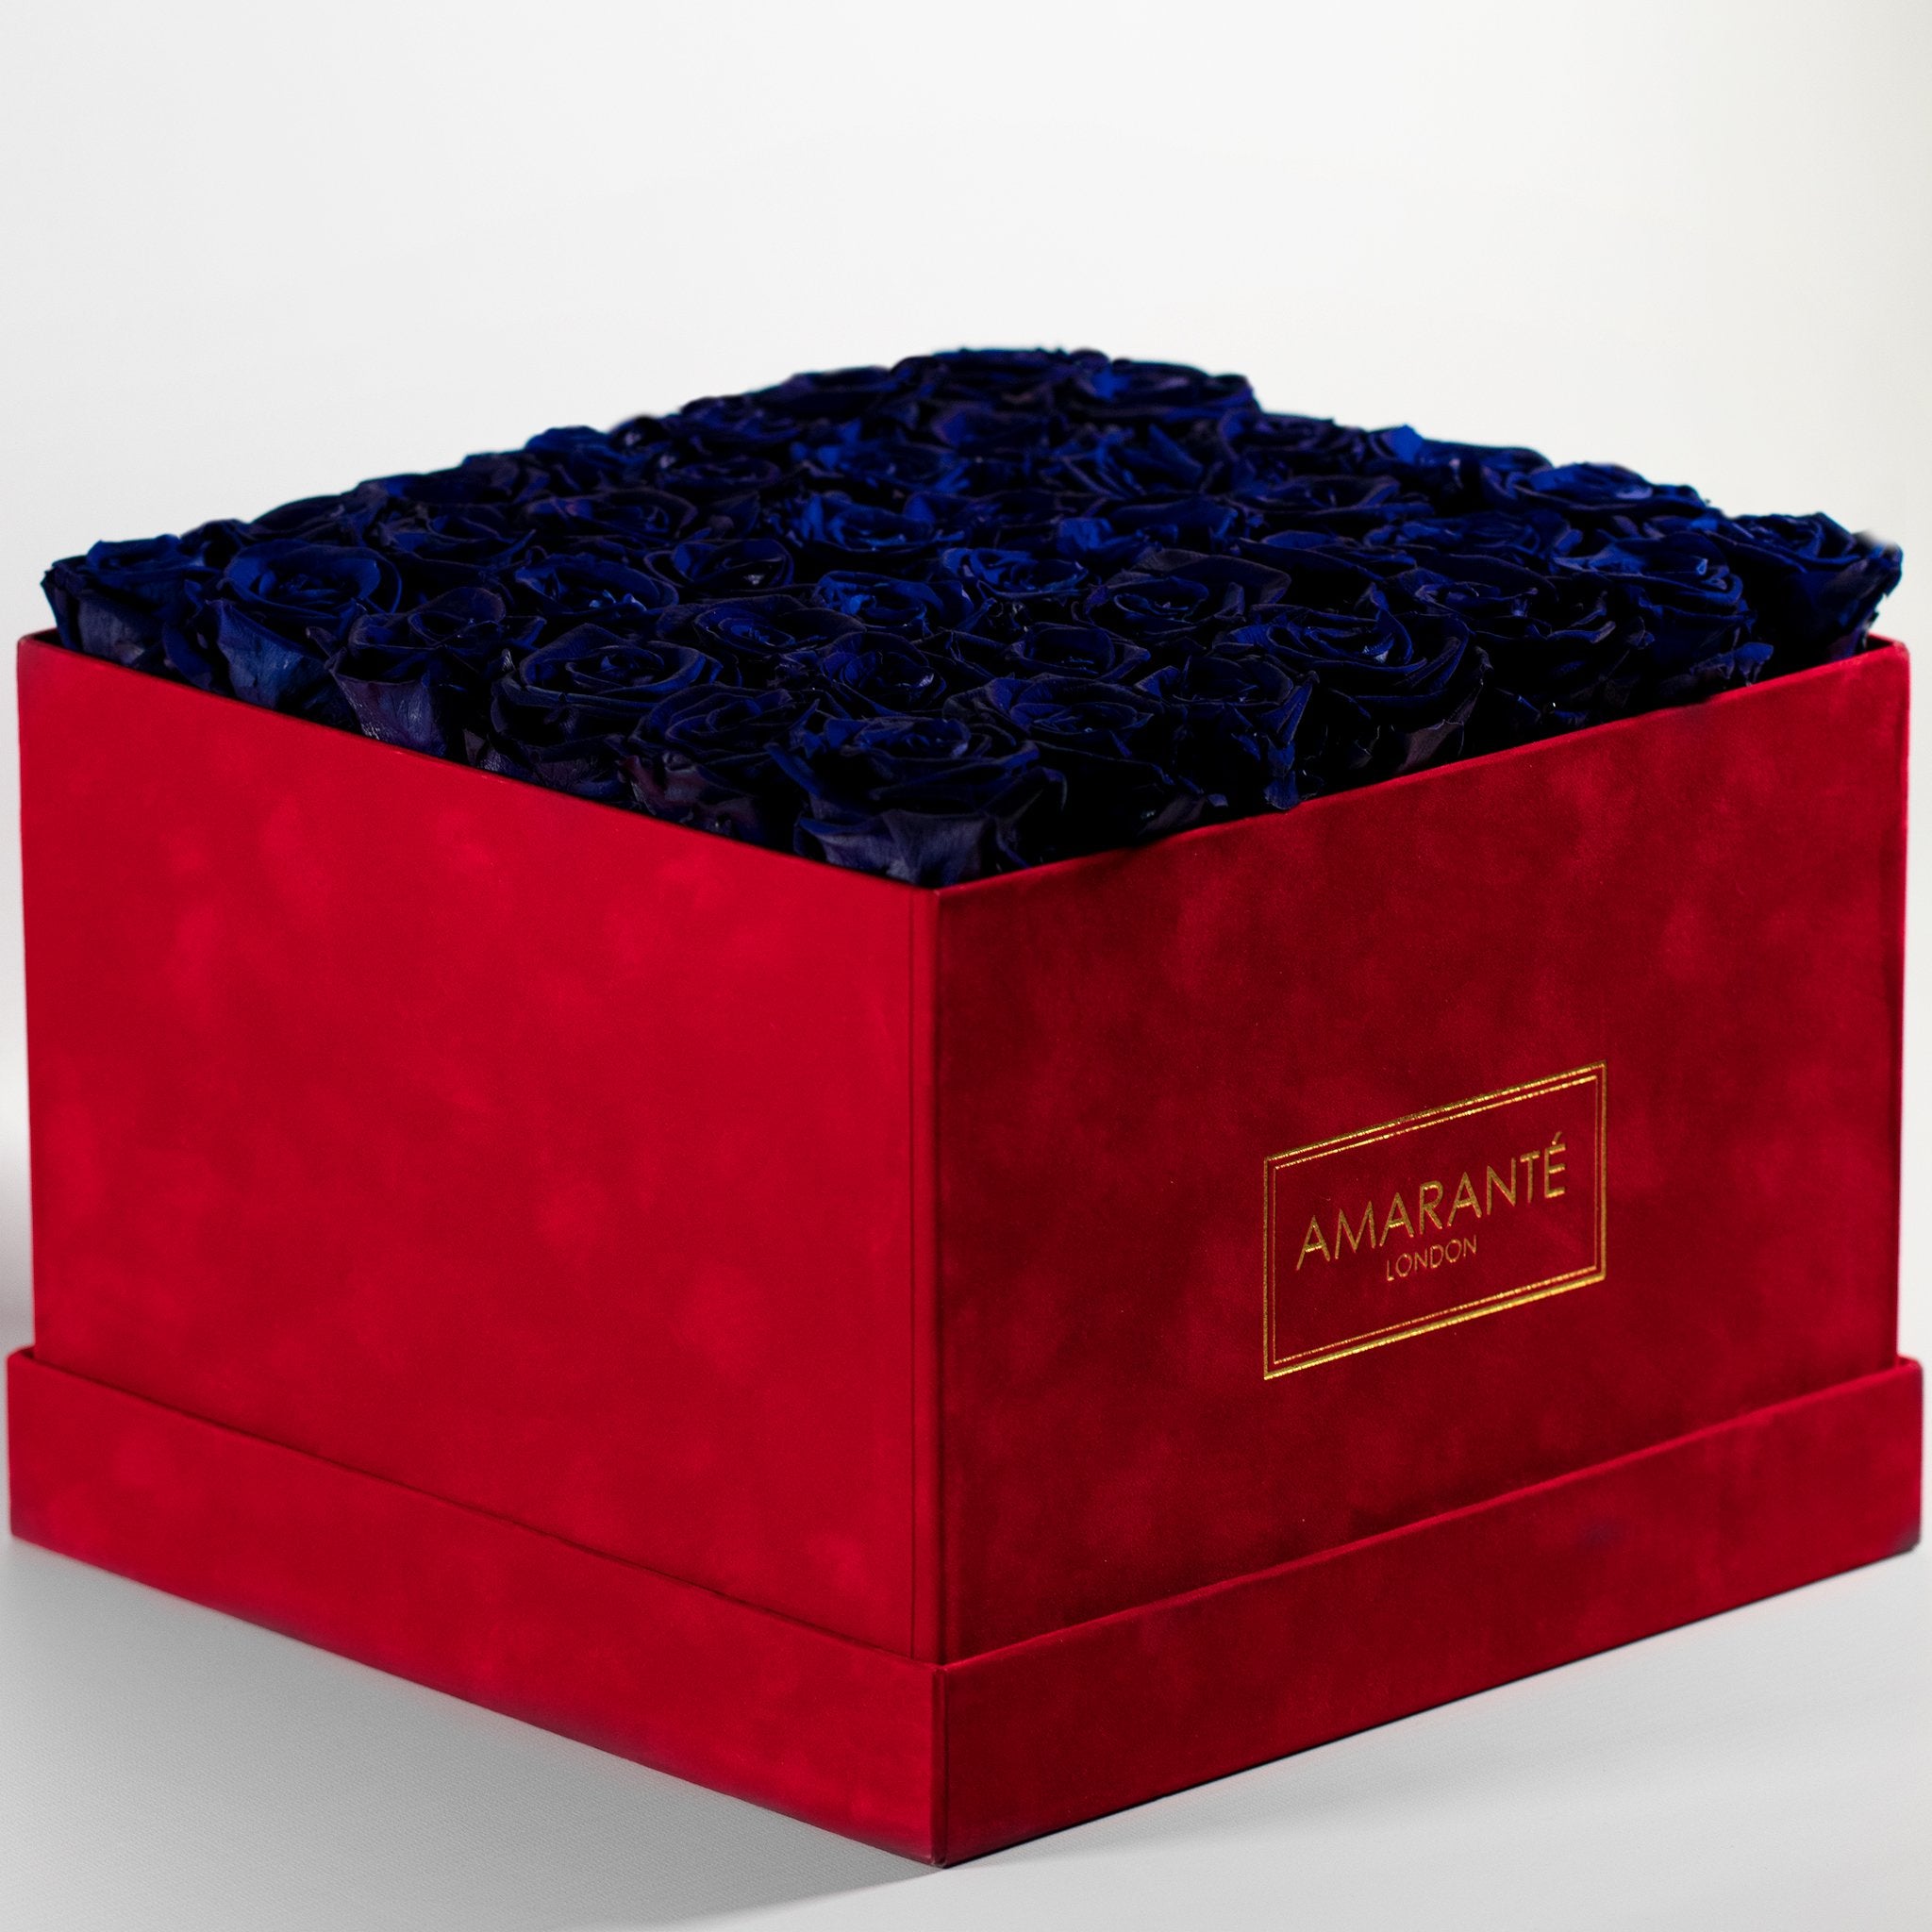 Luxurious royal blue roses implying protection and trust 